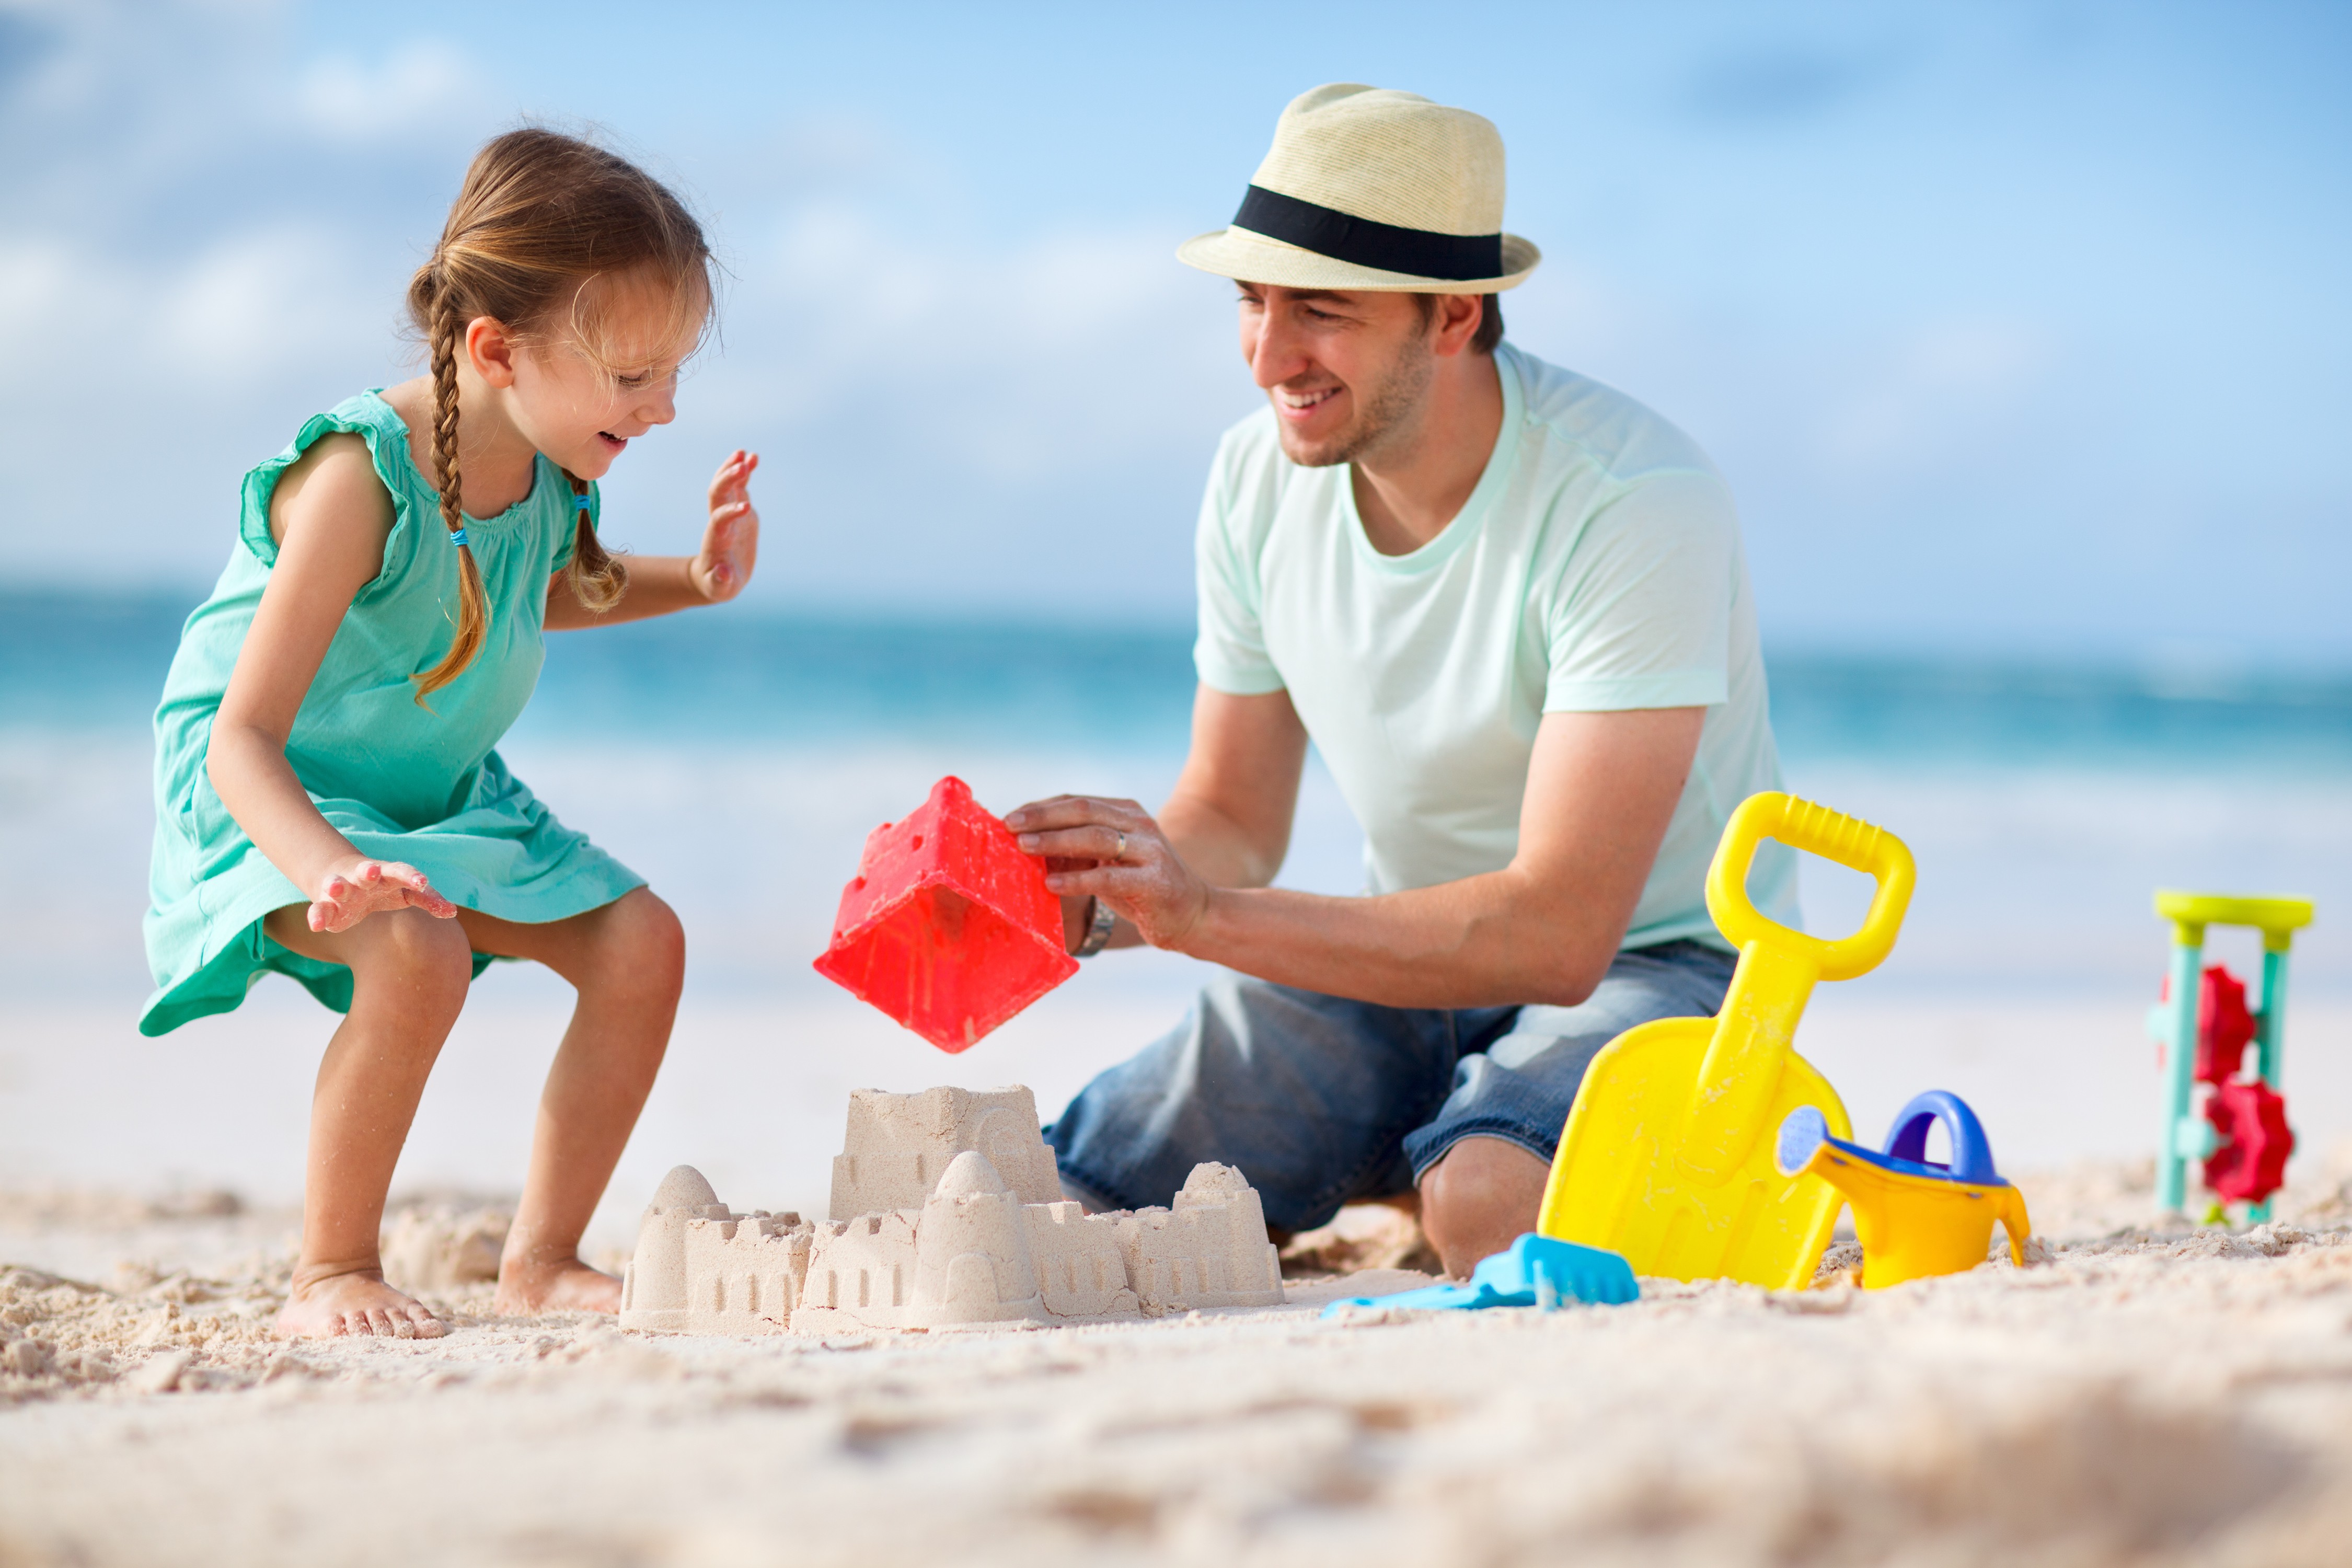 If you want to give someone something that will make them feel closer to you, give an experience such as family holiday, researchers say. Despite the cost and stress involved, a family holiday is well worth having. Photo: Shutterstock